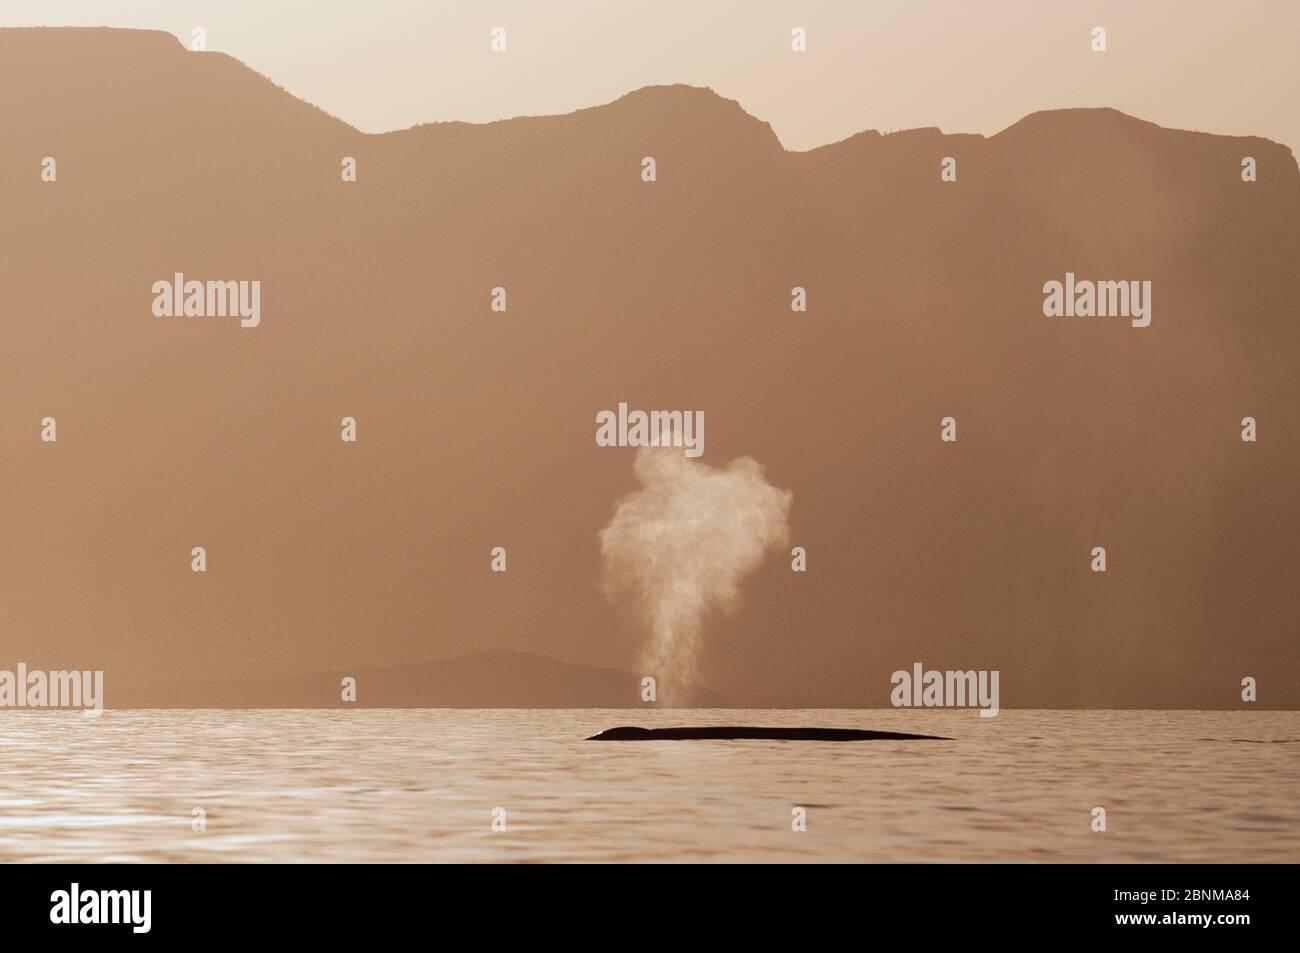 Blue whale (Balaenoptera musculus) blowing / spouting near coast, Sea of Cortez, Gulf of California, Baja California, Mexico, March, endangered specie Stock Photo